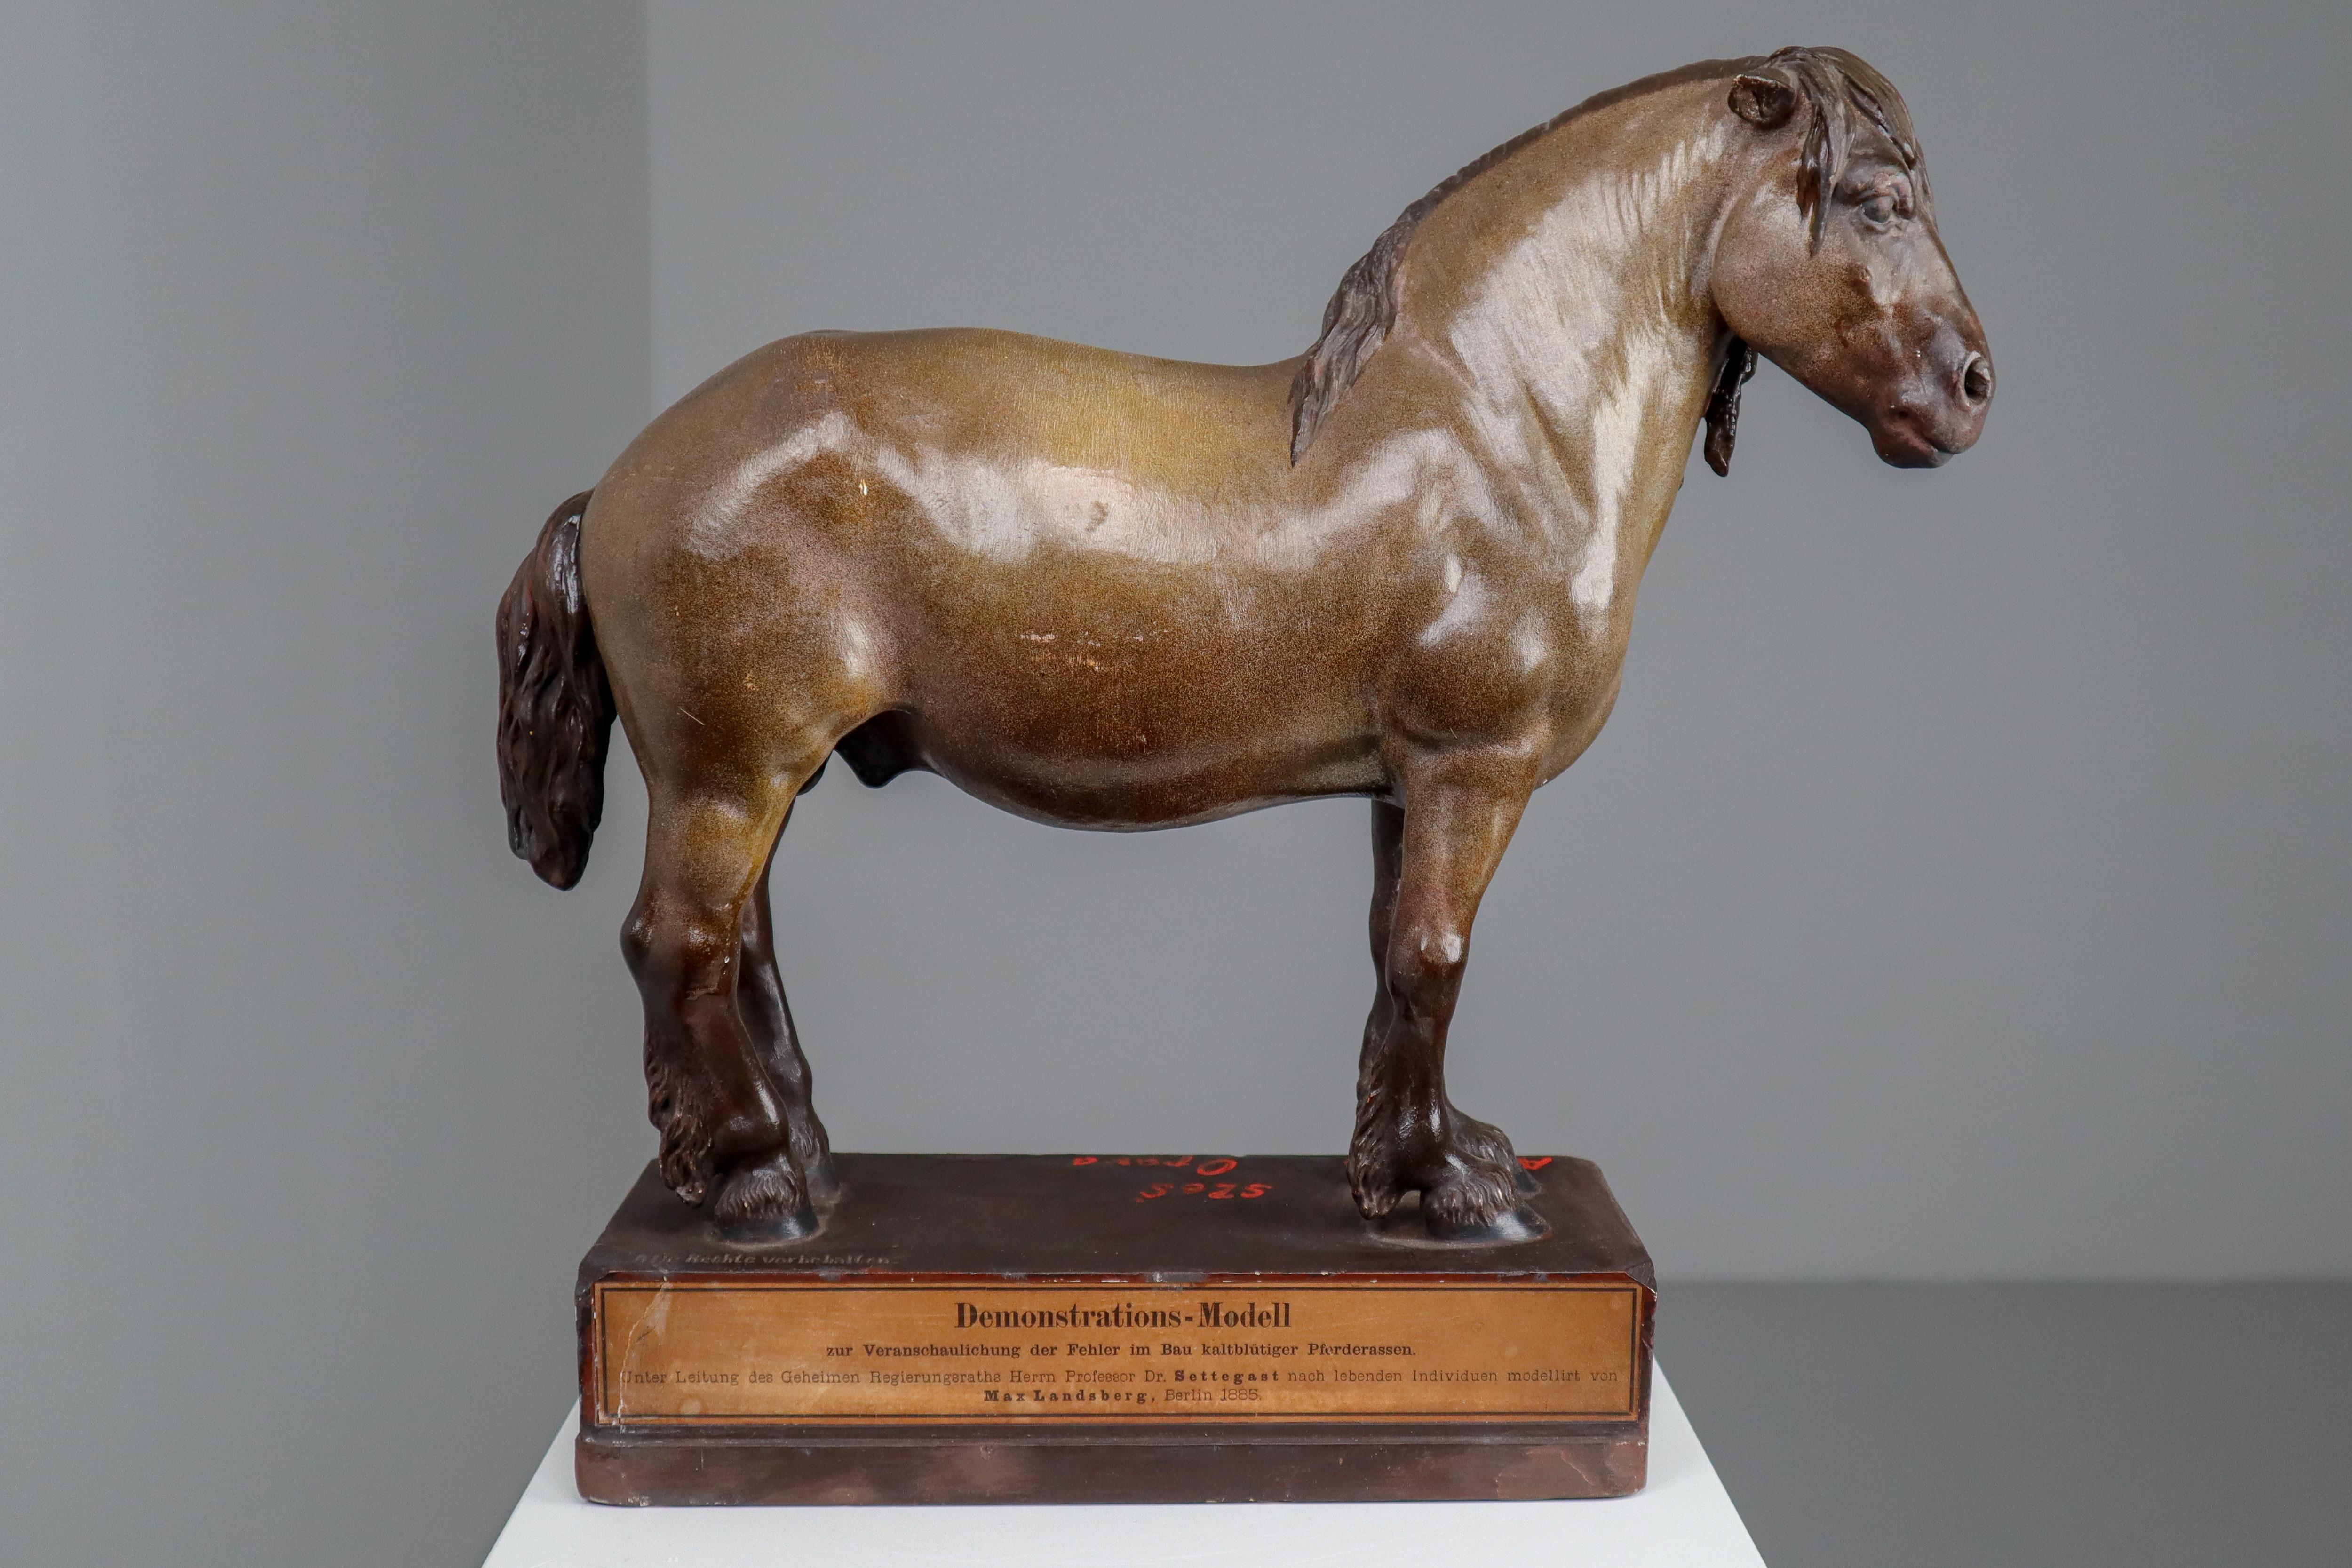 A cold blood horse model in painted plaster by Max Landsberg, Berlin after 1885, painted plaster, inscribed on base “Demonstrations Model 